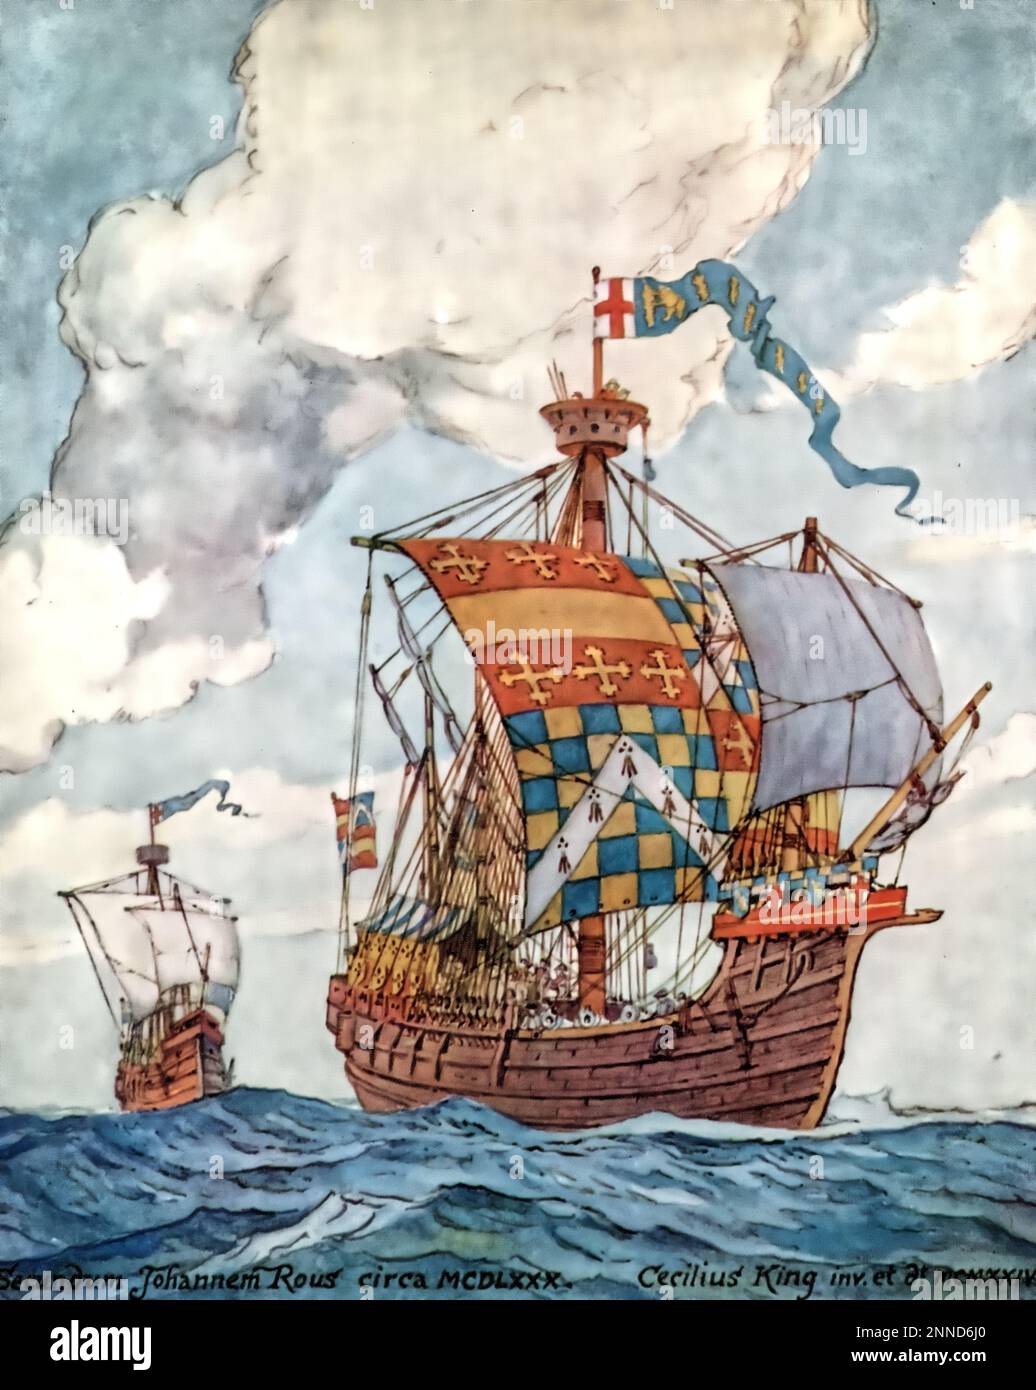 An English 15th century ship based on The Pageants of Richard Beauchamp, Earl of Warwick (1382-1439), c1927. By Cecil King (1881-1942), after John Rous (d1492). Stock Photo